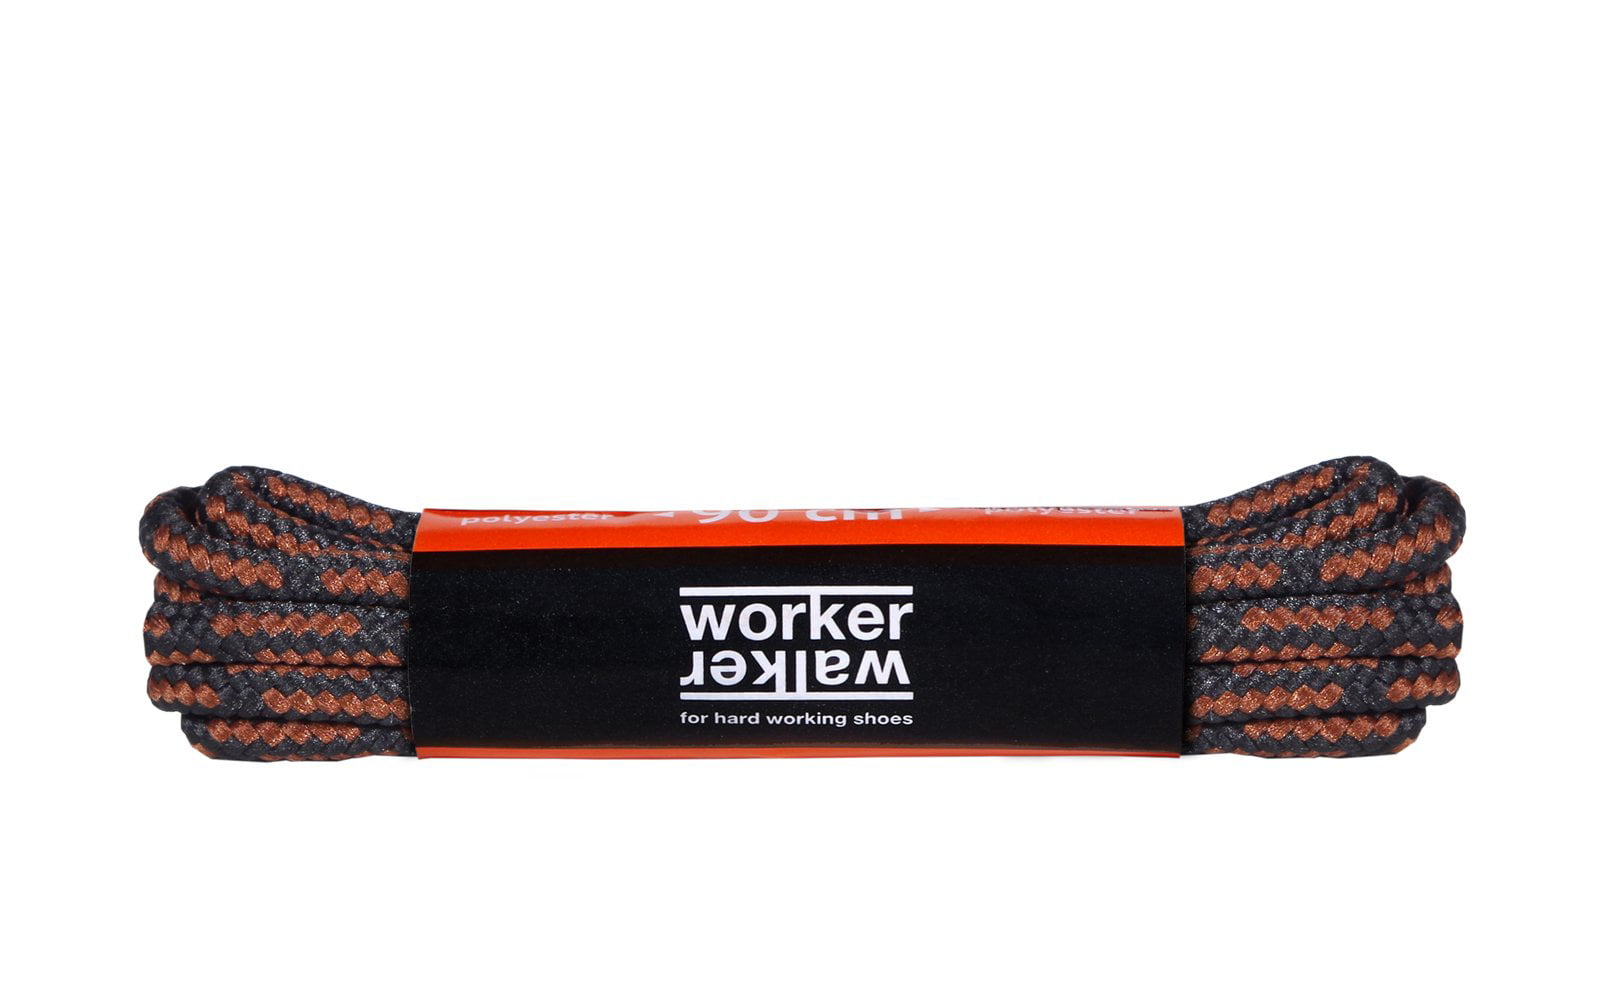 Round Shoe Laces For Work Boots Shoes Made in Europe By Worker Walker Laces Pro 1 Pair Health And Safety Boots 